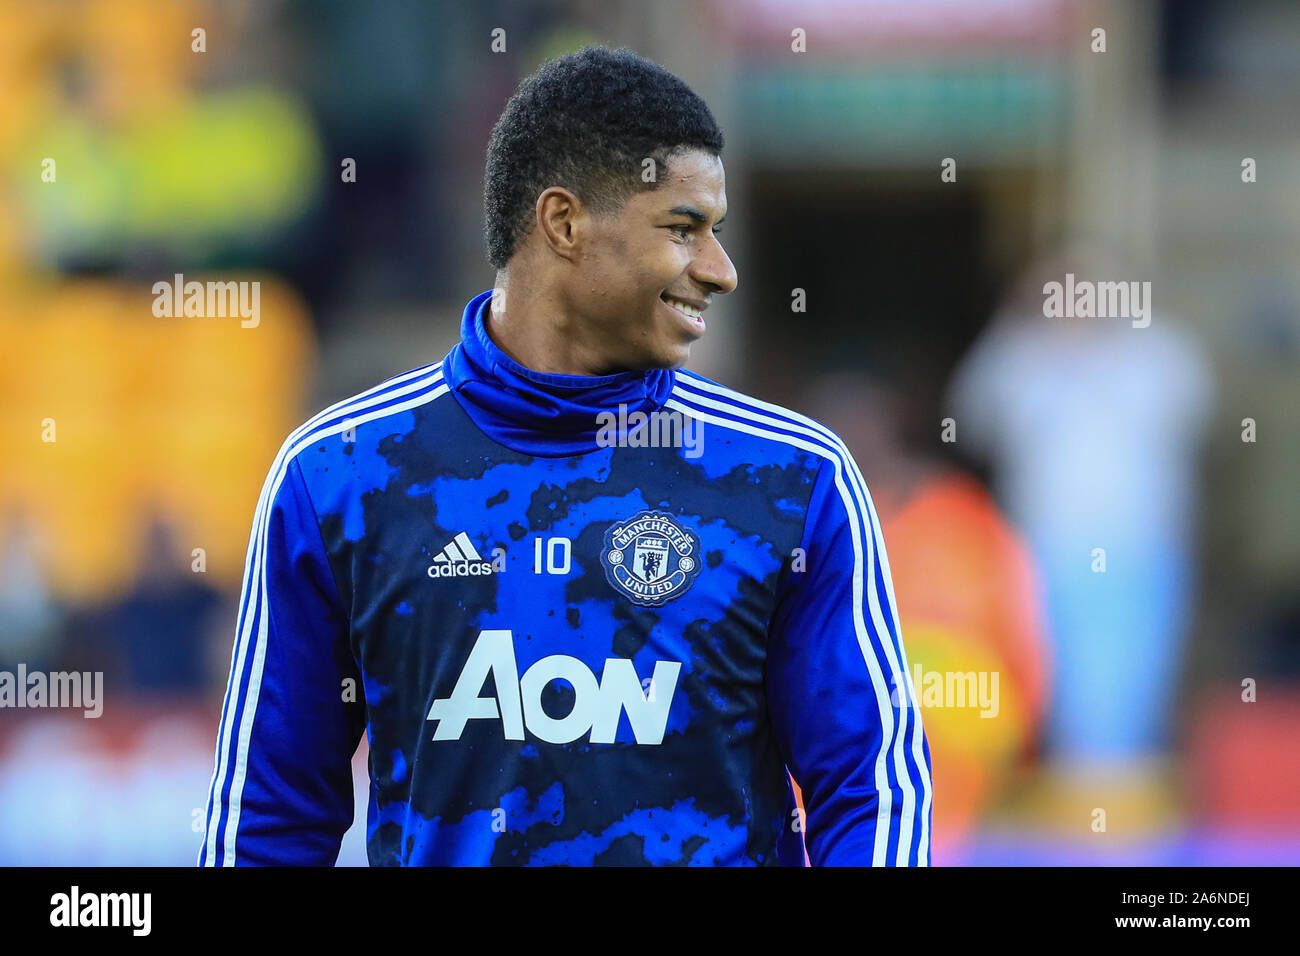 27th October 2019, Carrow Road, Norwich, England; Premier League, Norwich City v Manchester United : Marcus Rashford (10) of Manchester United warming up  Credit: Mark Cosgrove/News Images Stock Photo